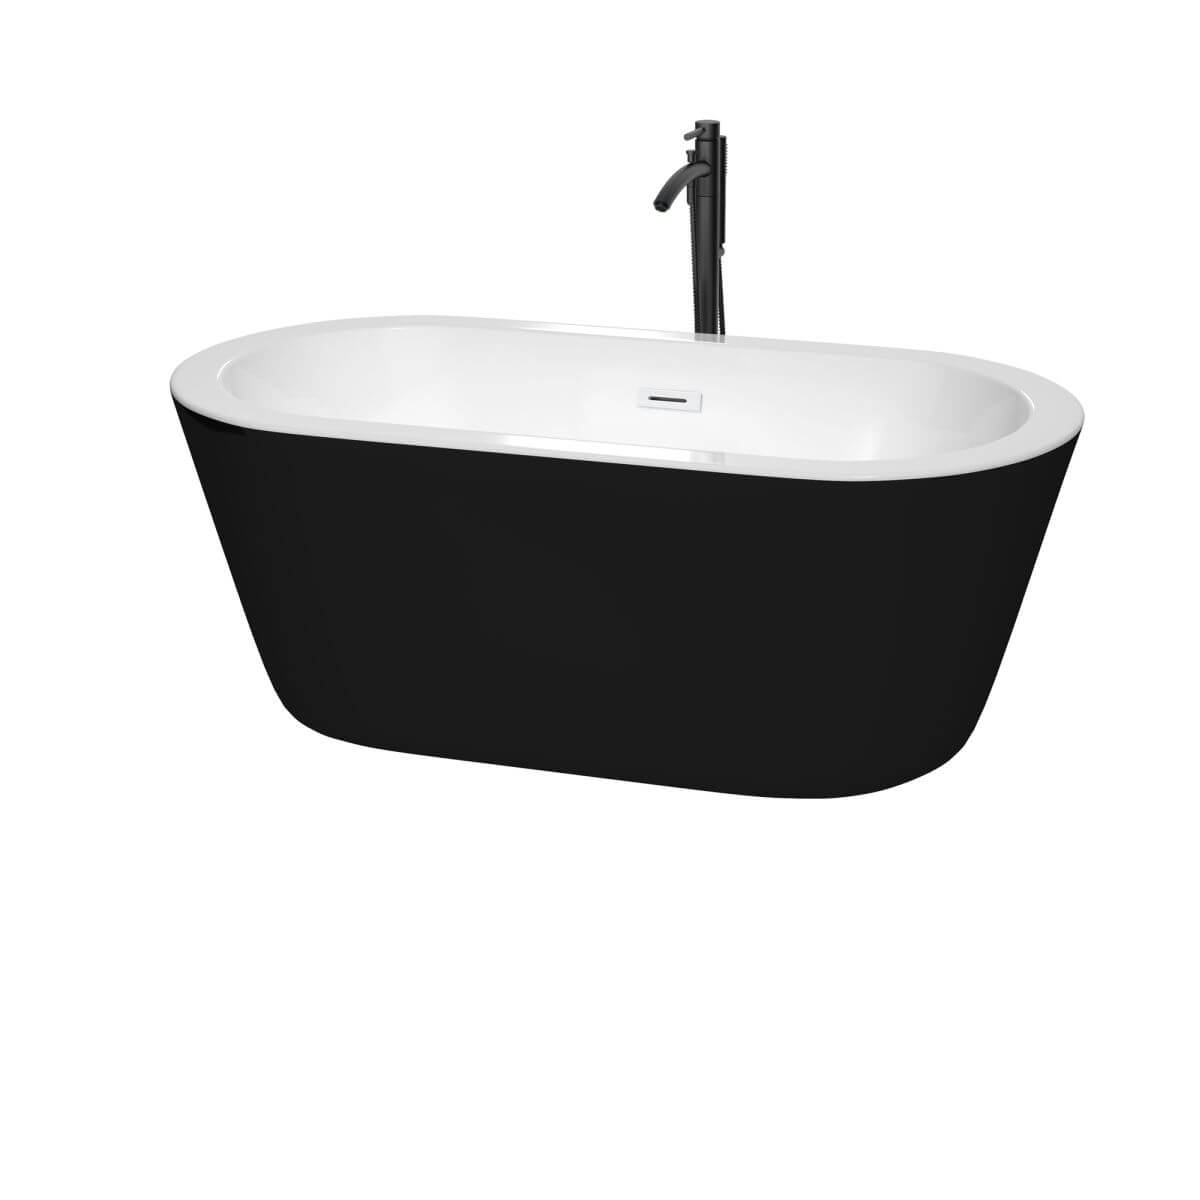 Wyndham Collection Mermaid 60 inch Freestanding Bathtub in Black with White Interior, Shiny White Trim and Floor Mounted Faucet in Matte Black - WCOBT100360BKSWATPBK